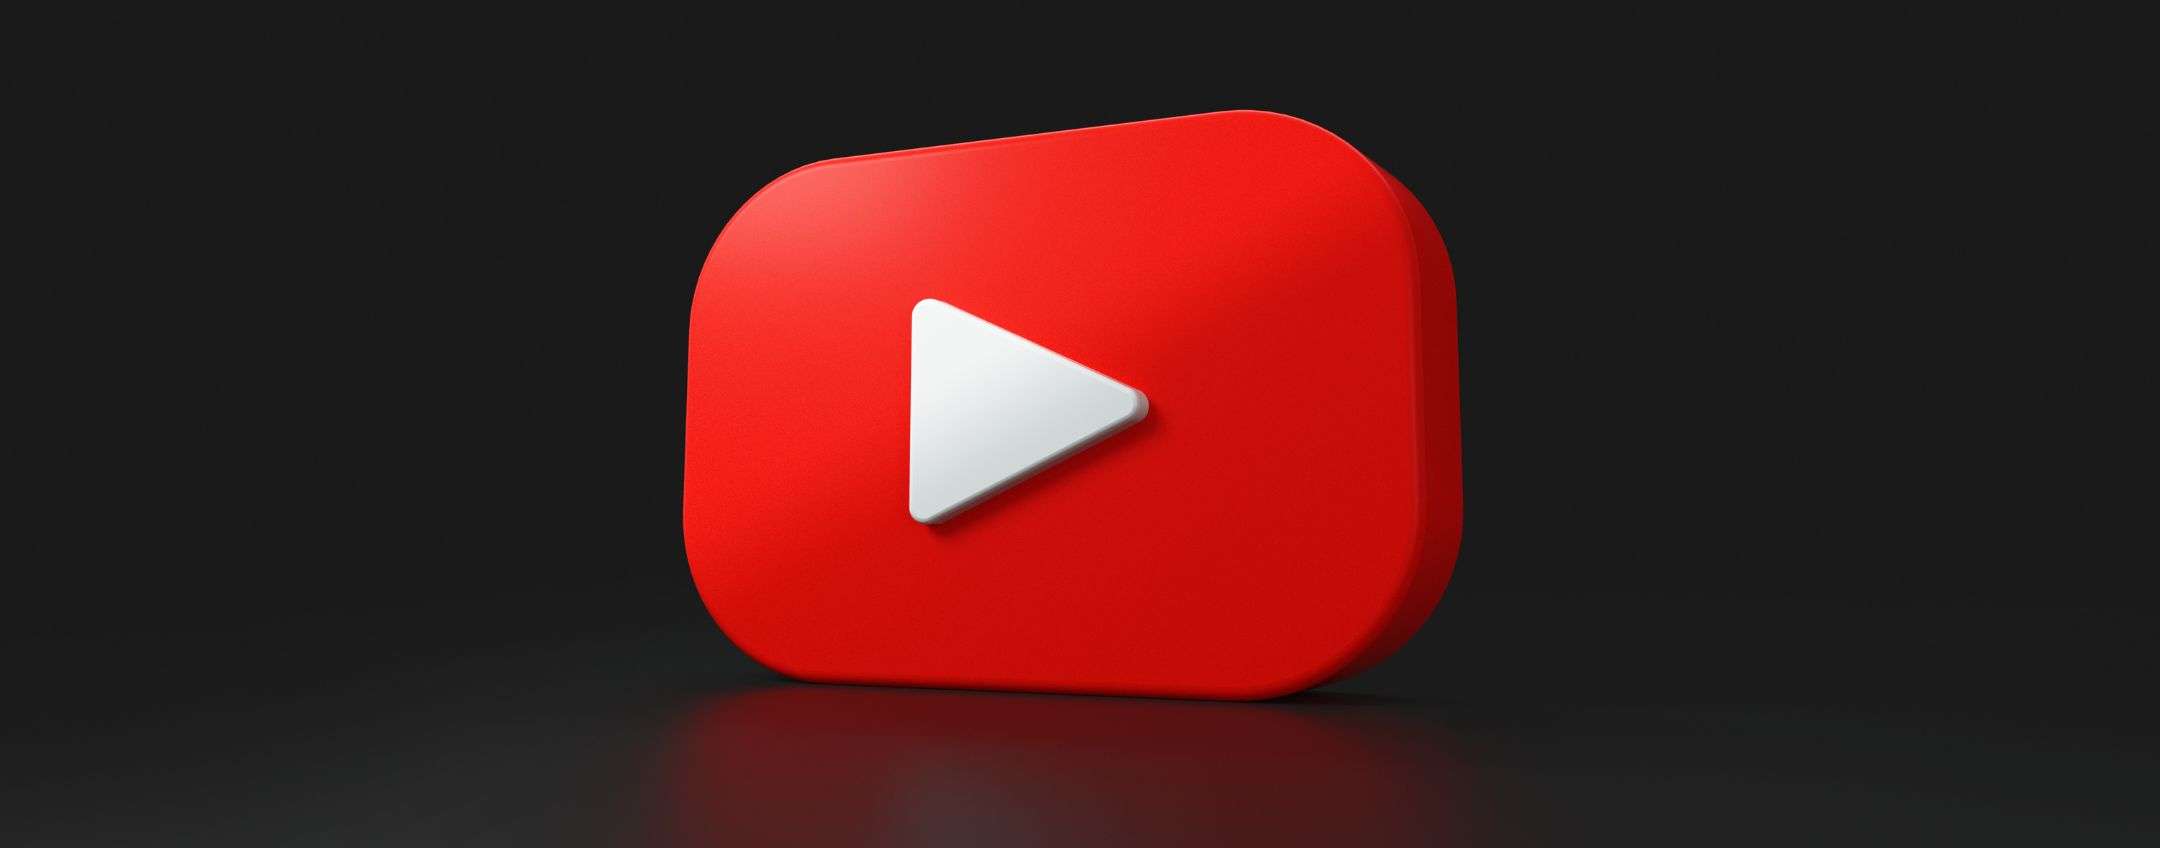 YouTube offers 1080p Premium: the video quality increases, but be careful